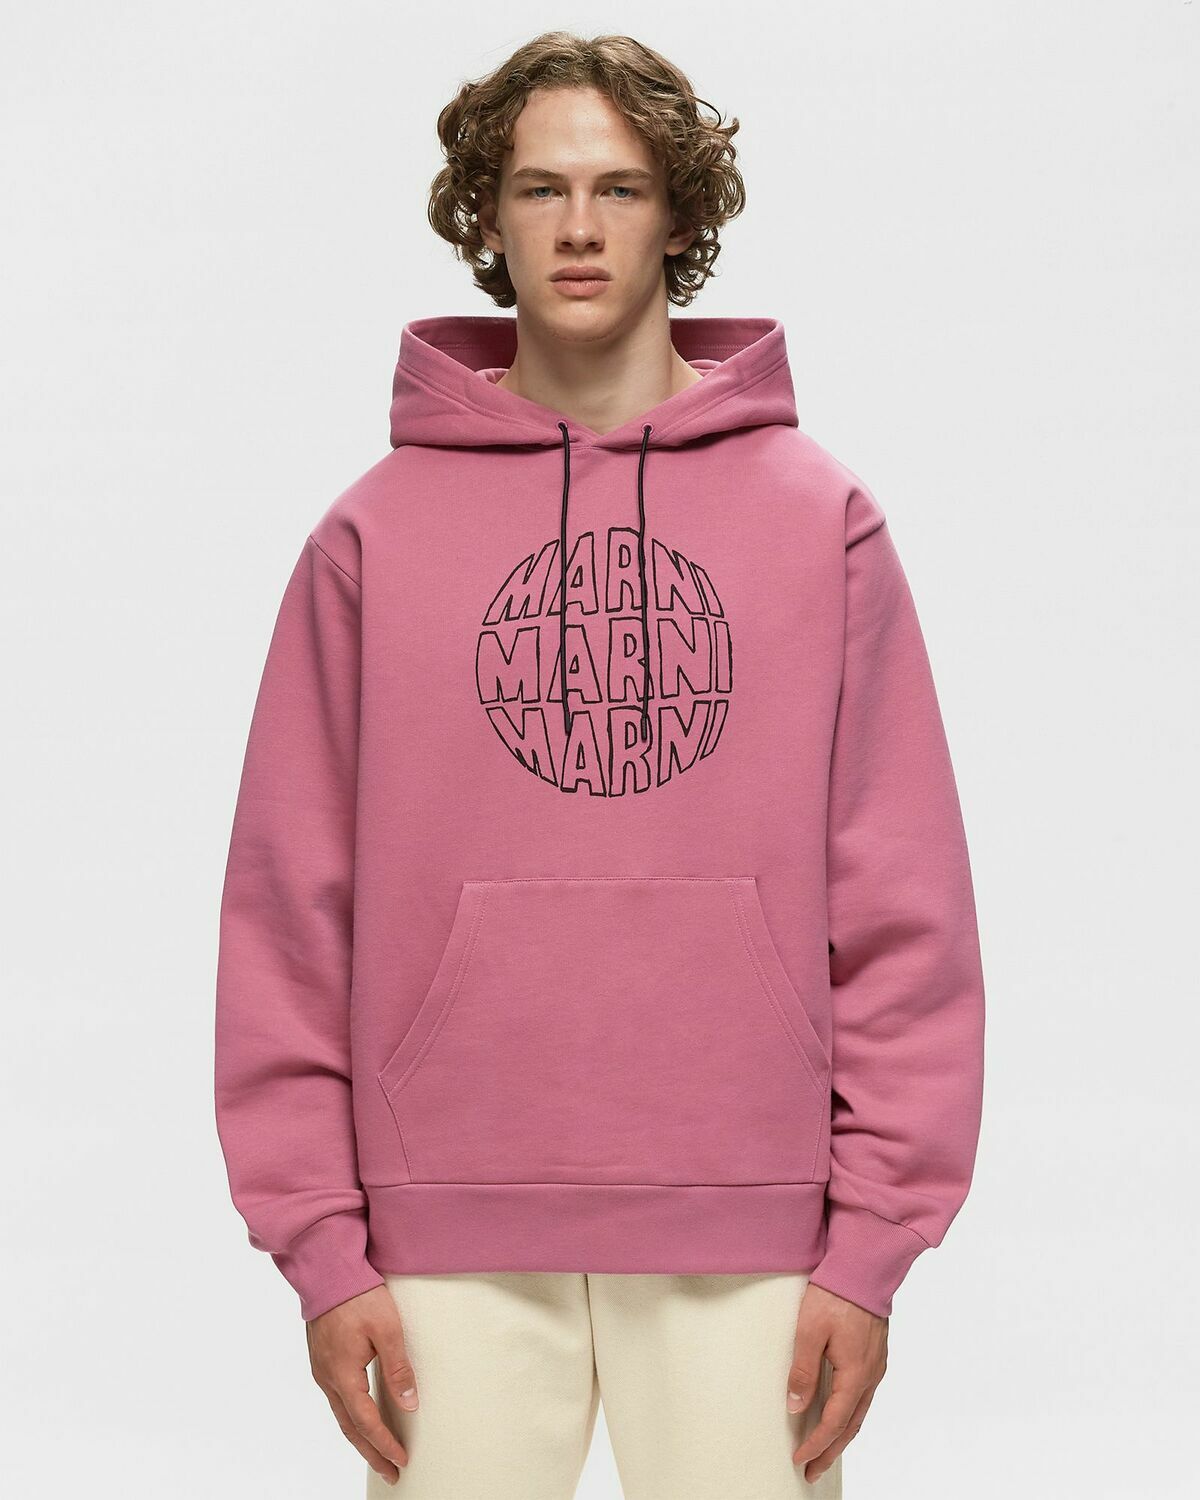 Transform Your Hoodie Into a Fashion Statement